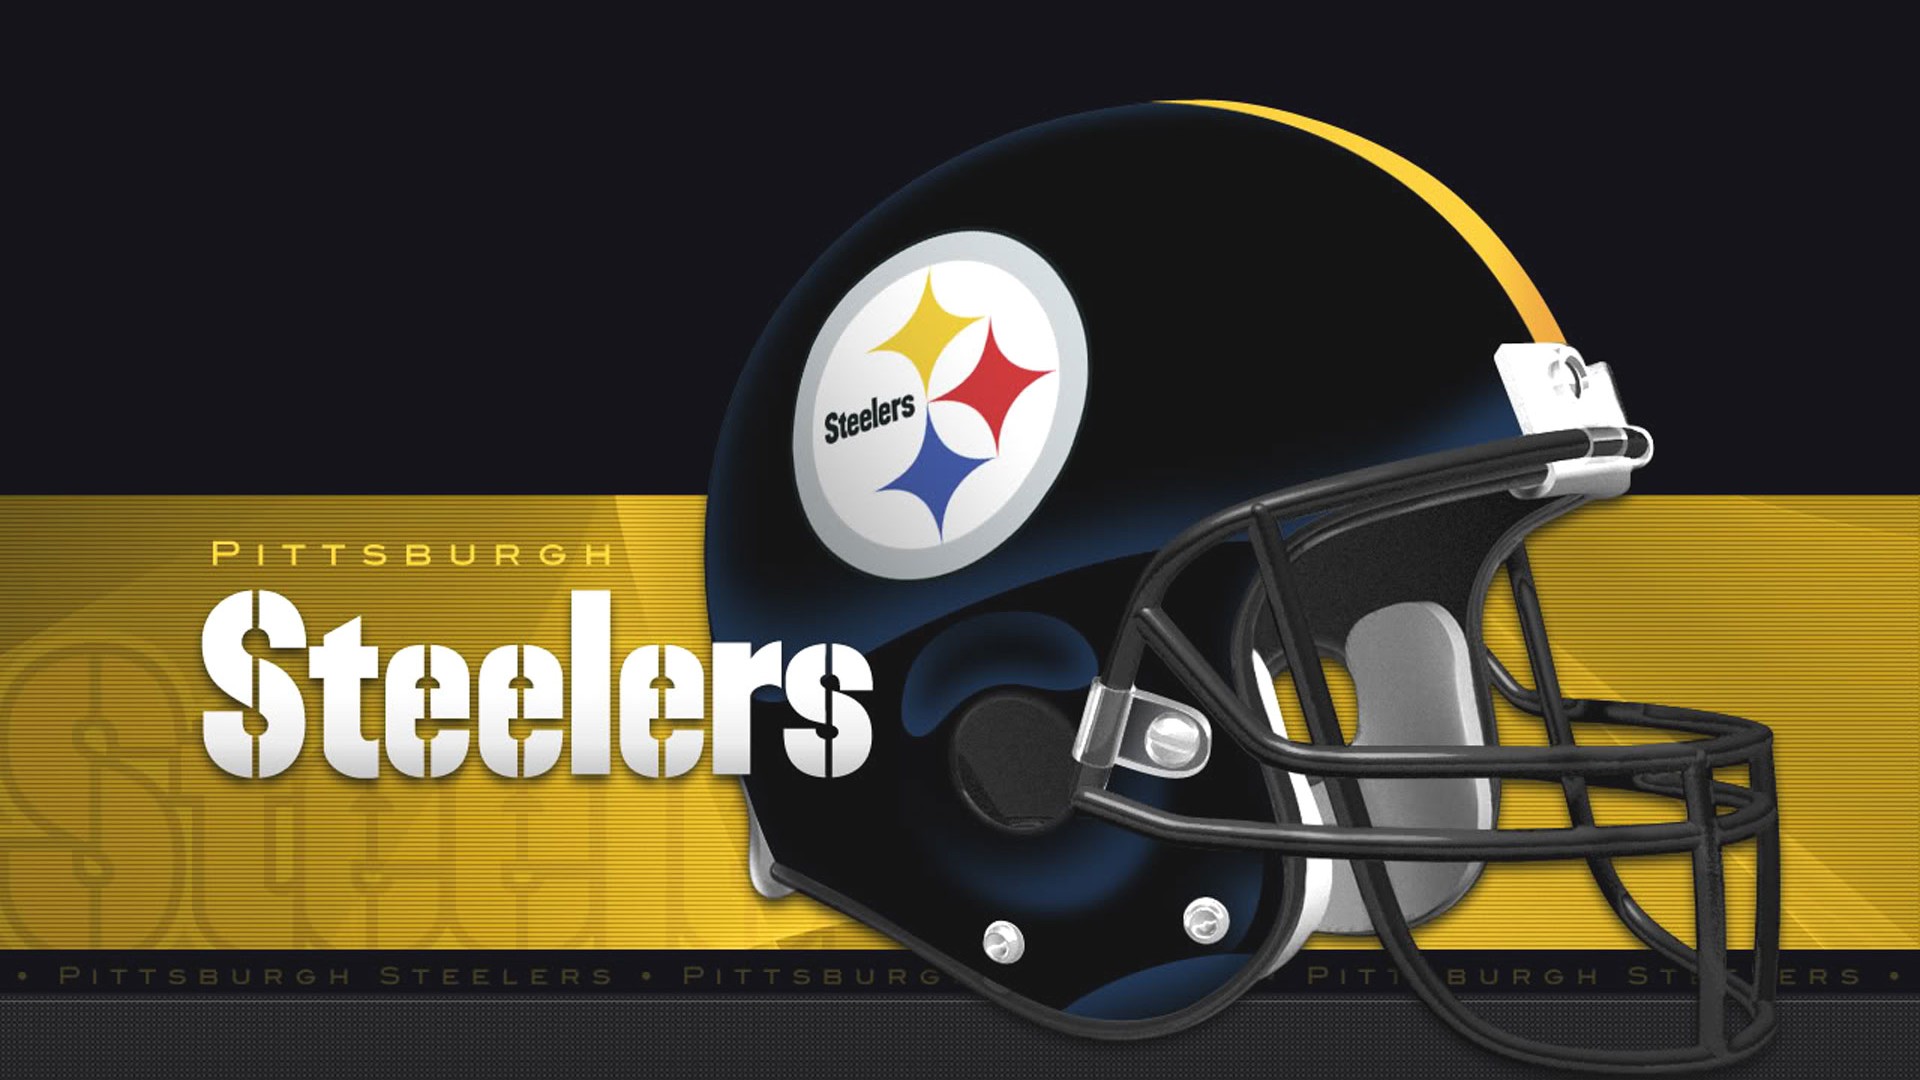 Pittsburgh Steelers Wallpaper For Mac Backgrounds with resolution 1920x1080 pixel. You can make this wallpaper for your Mac or Windows Desktop Background, iPhone, Android or Tablet and another Smartphone device